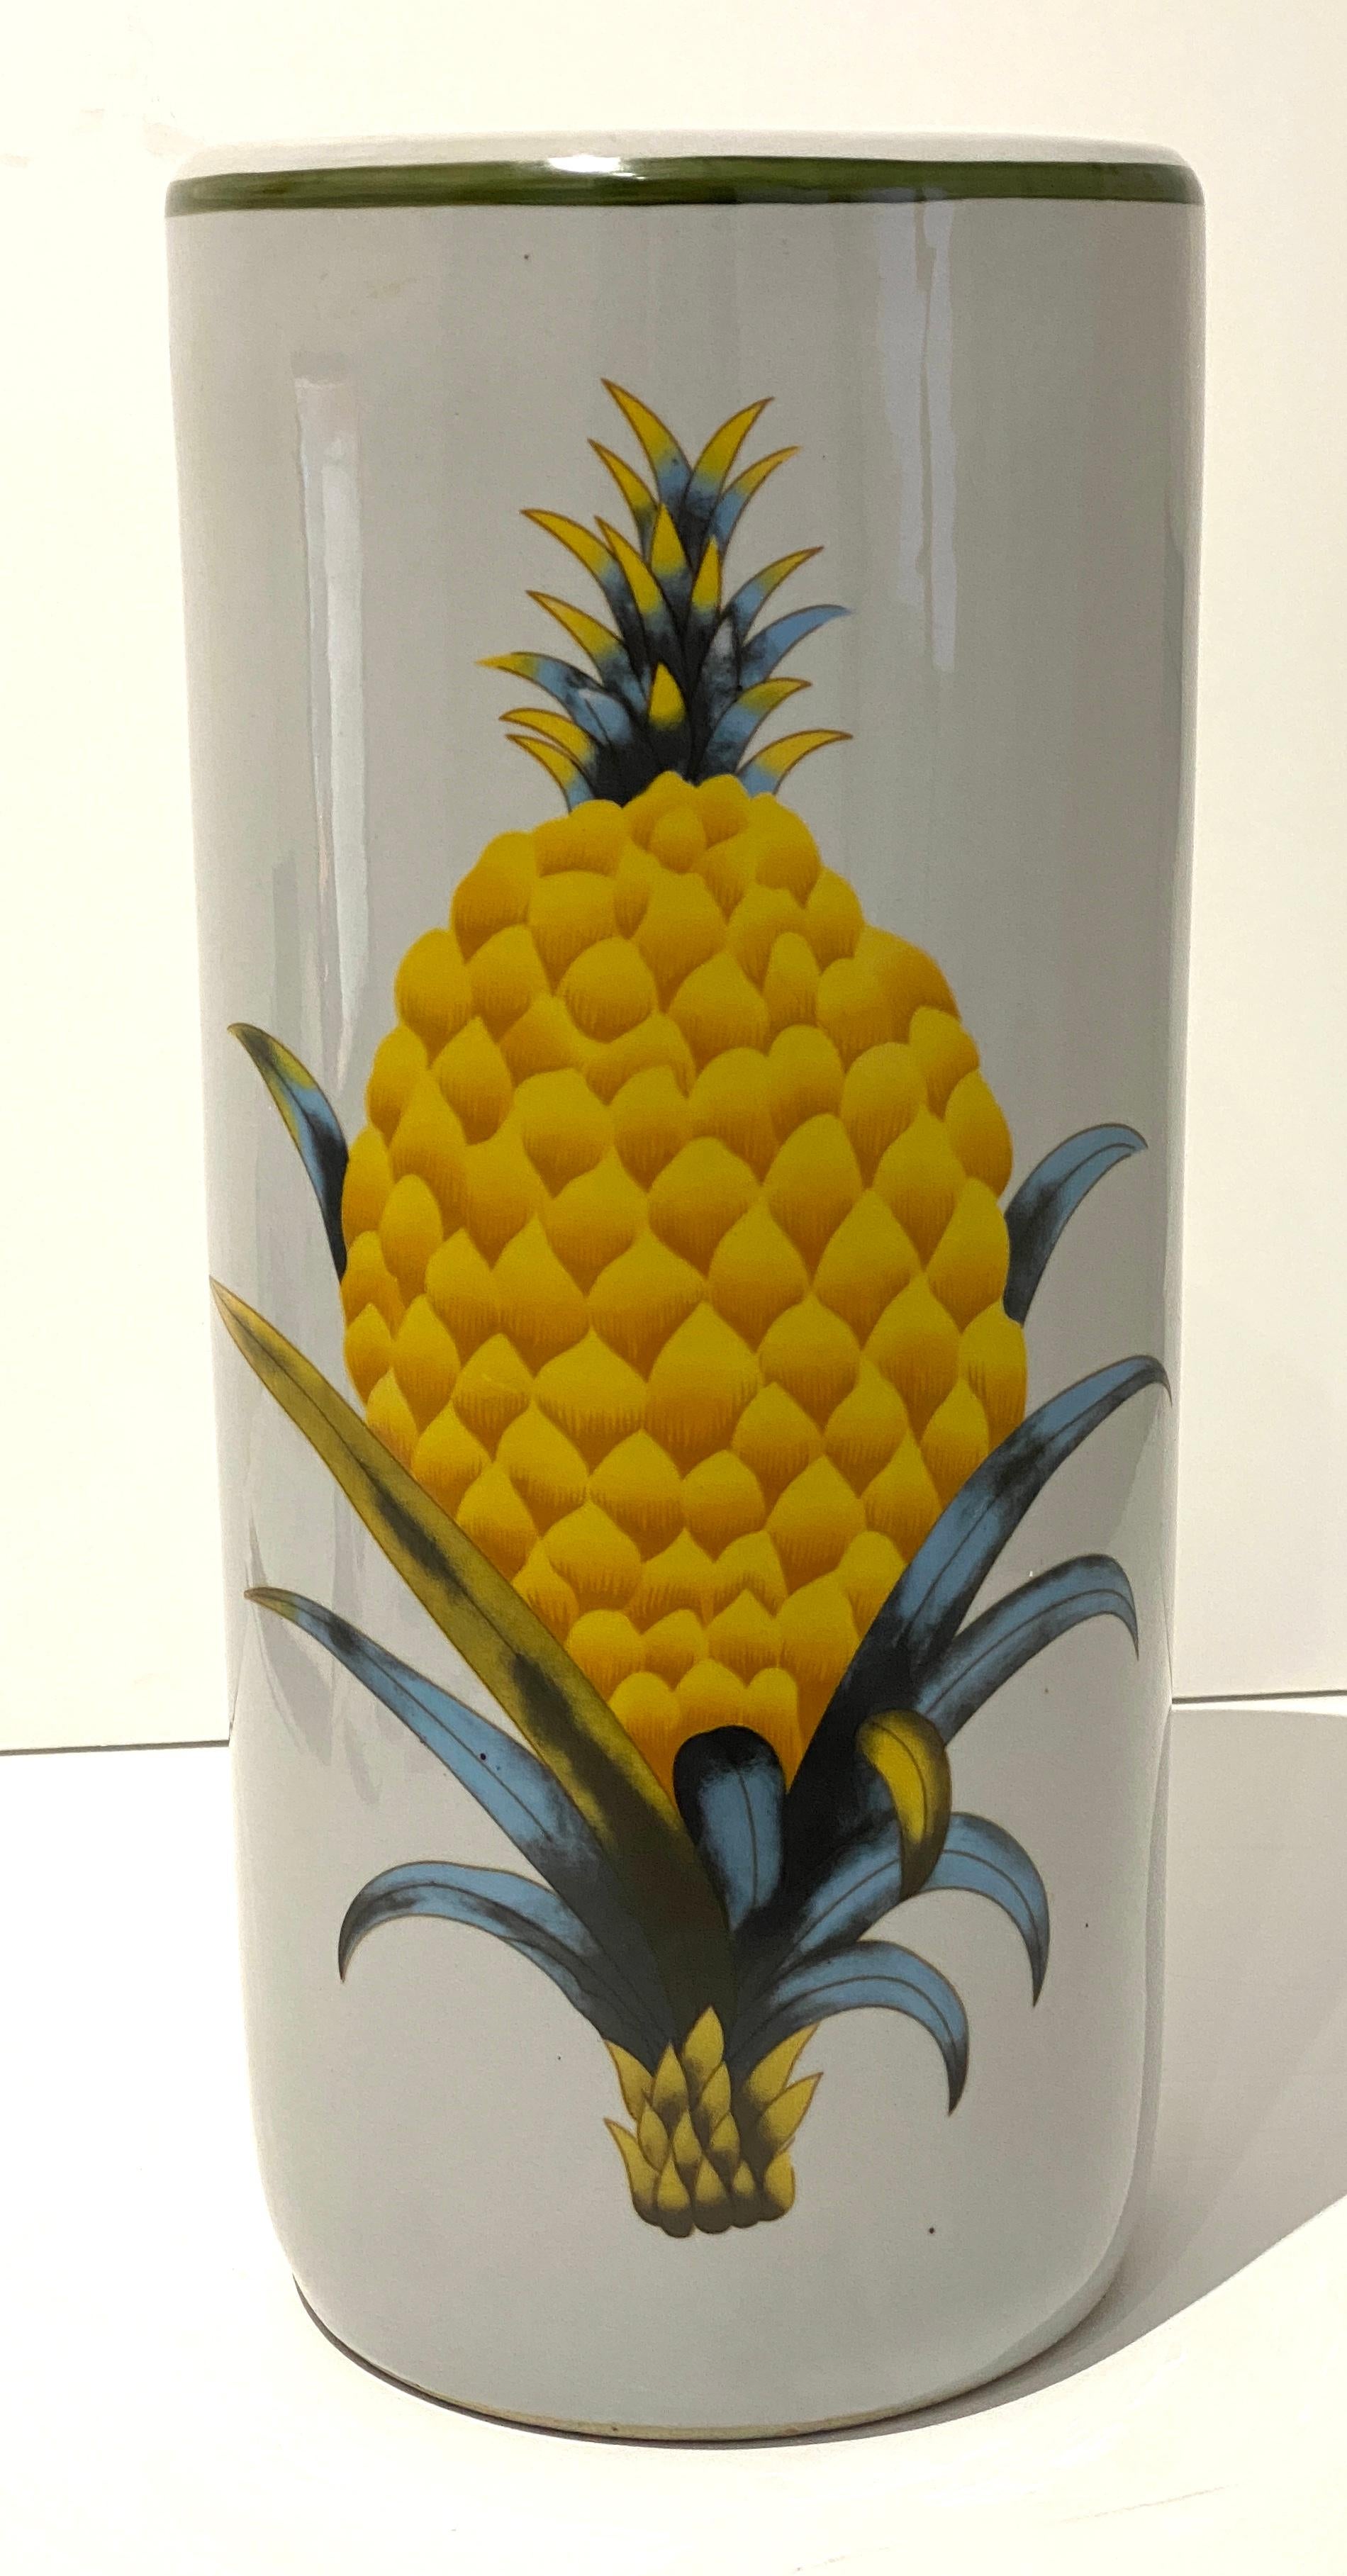 Chinese Umbrella Urn with Pineapple Motif